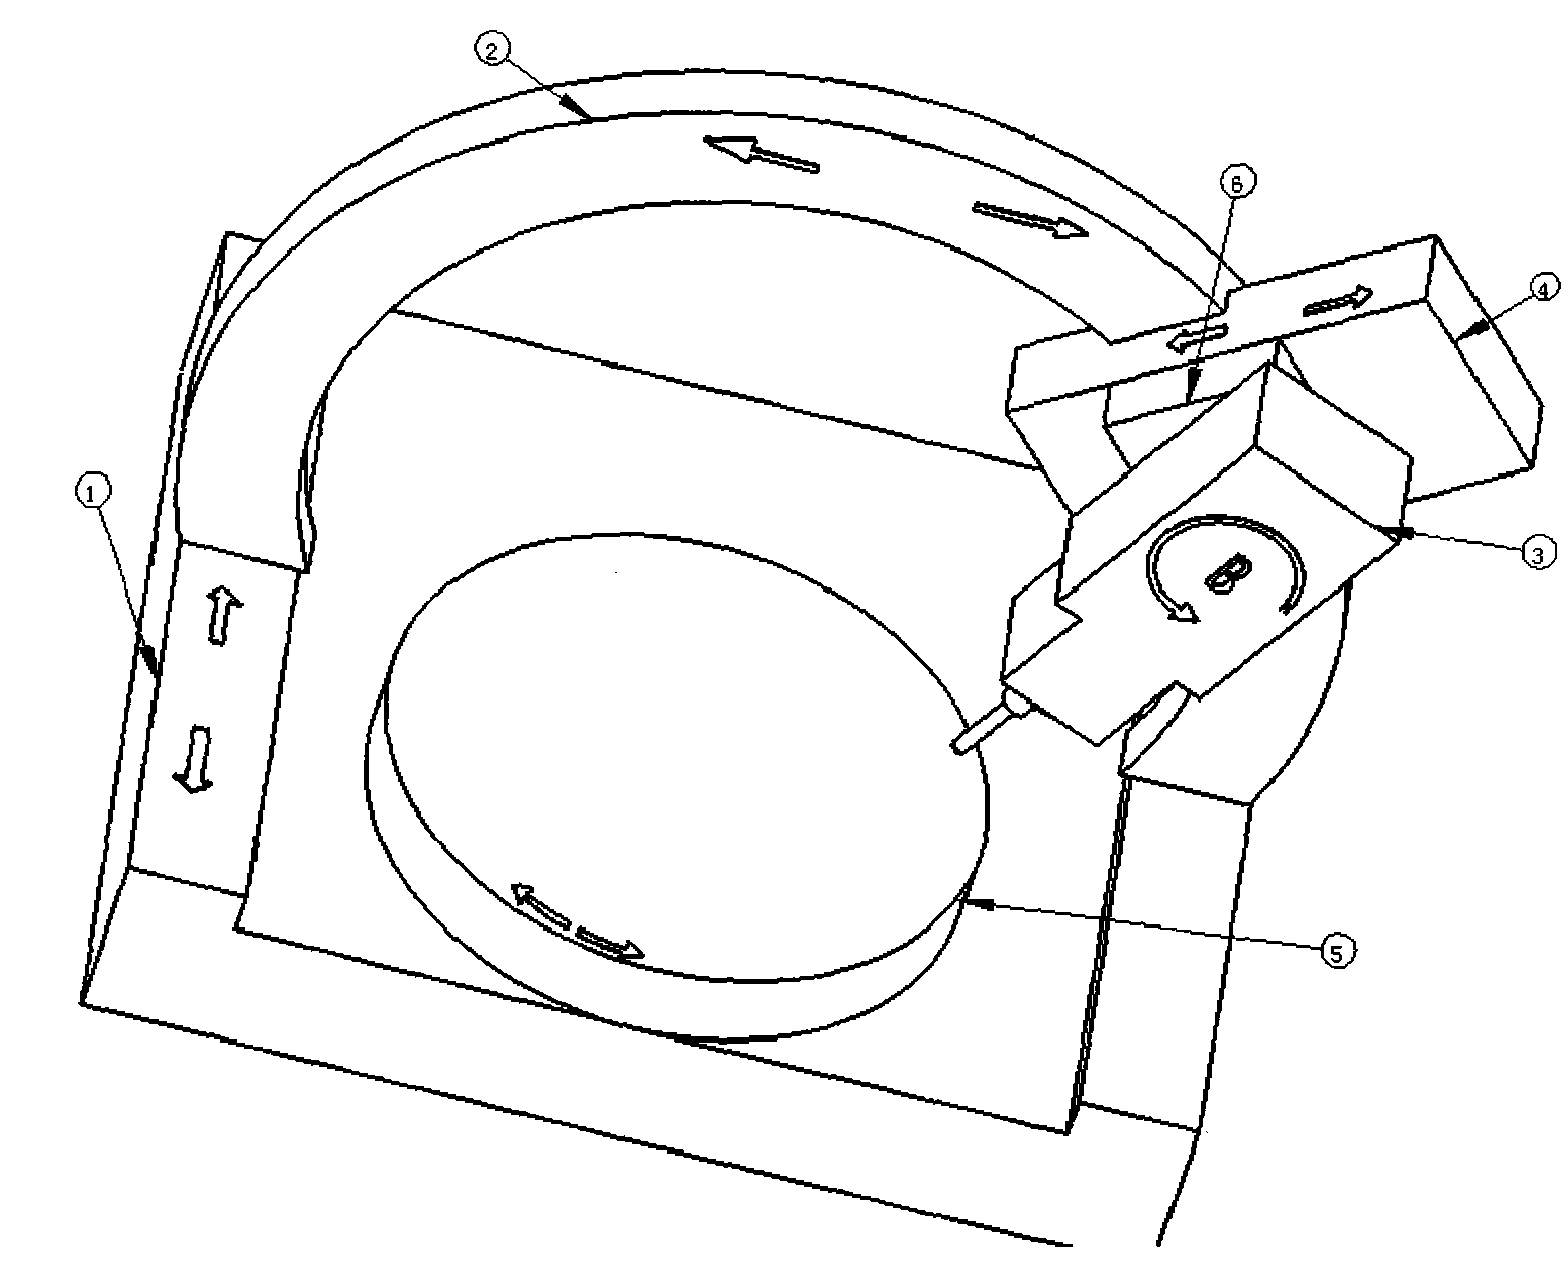 Circular arc or circular gantry structure for machine tool, robot and mechanical measuring machine